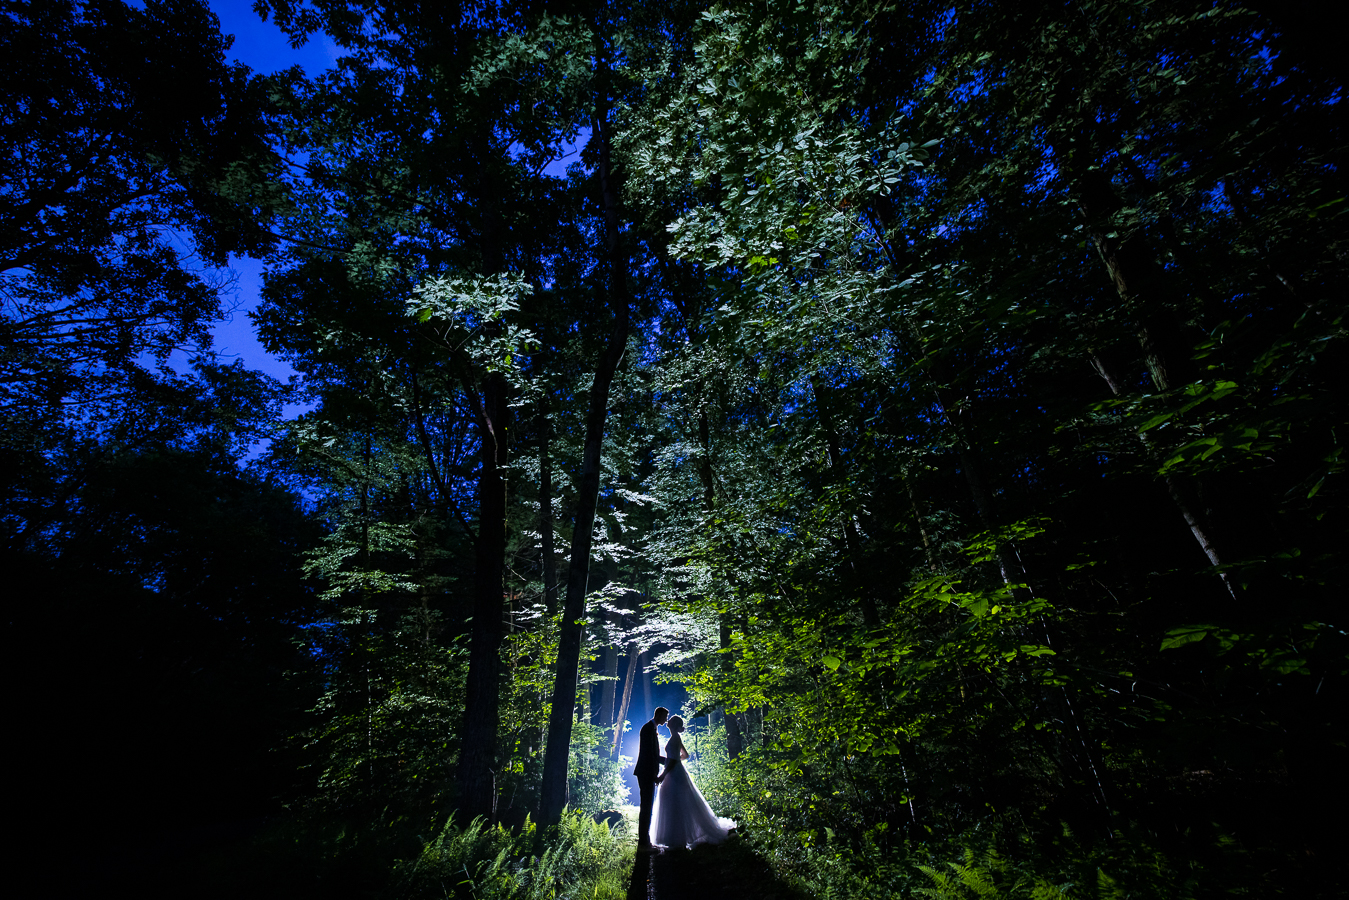 creative jim thorpe wedding photographer, lisa rhinehart, captures this vibrant night photo of the bride and groom standing on the trail holding hands facing one another as the trees glow around them with the vibrant blue night sky